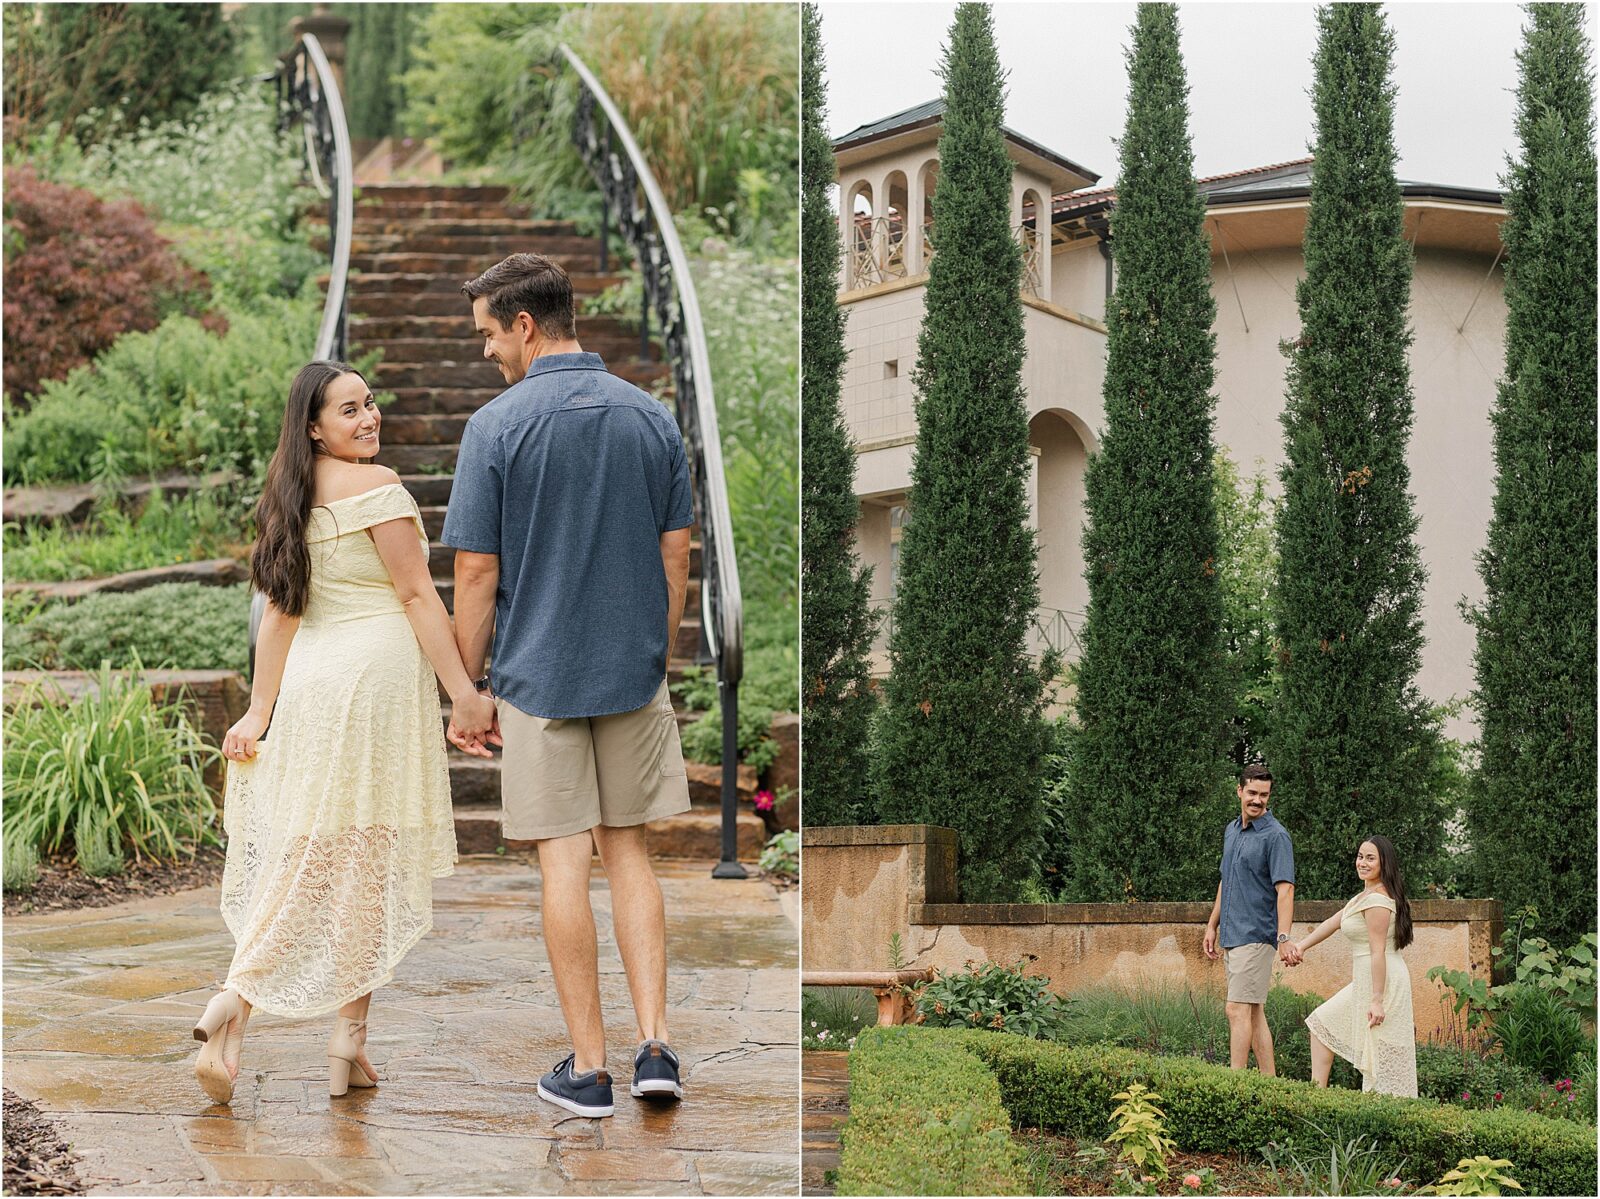 Marie and Mark's rainy engagement session at the philbrook